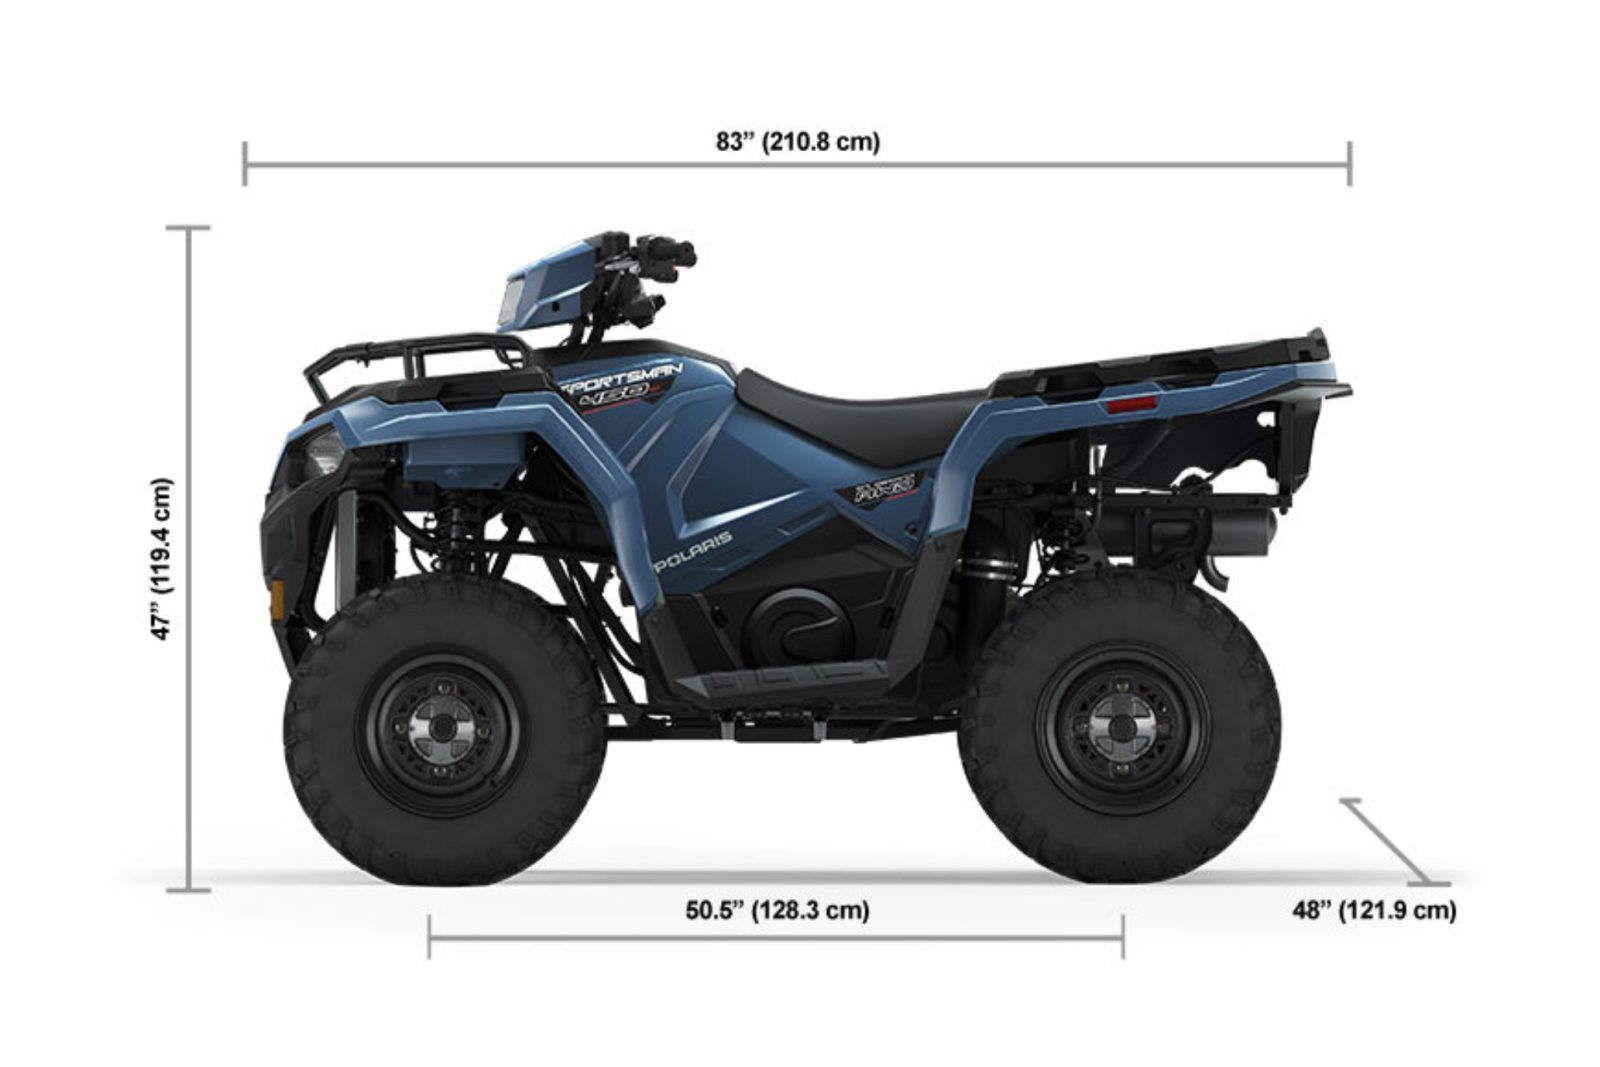 Polaris Sportsman 450 Specifications, Top Speed, and Everything!